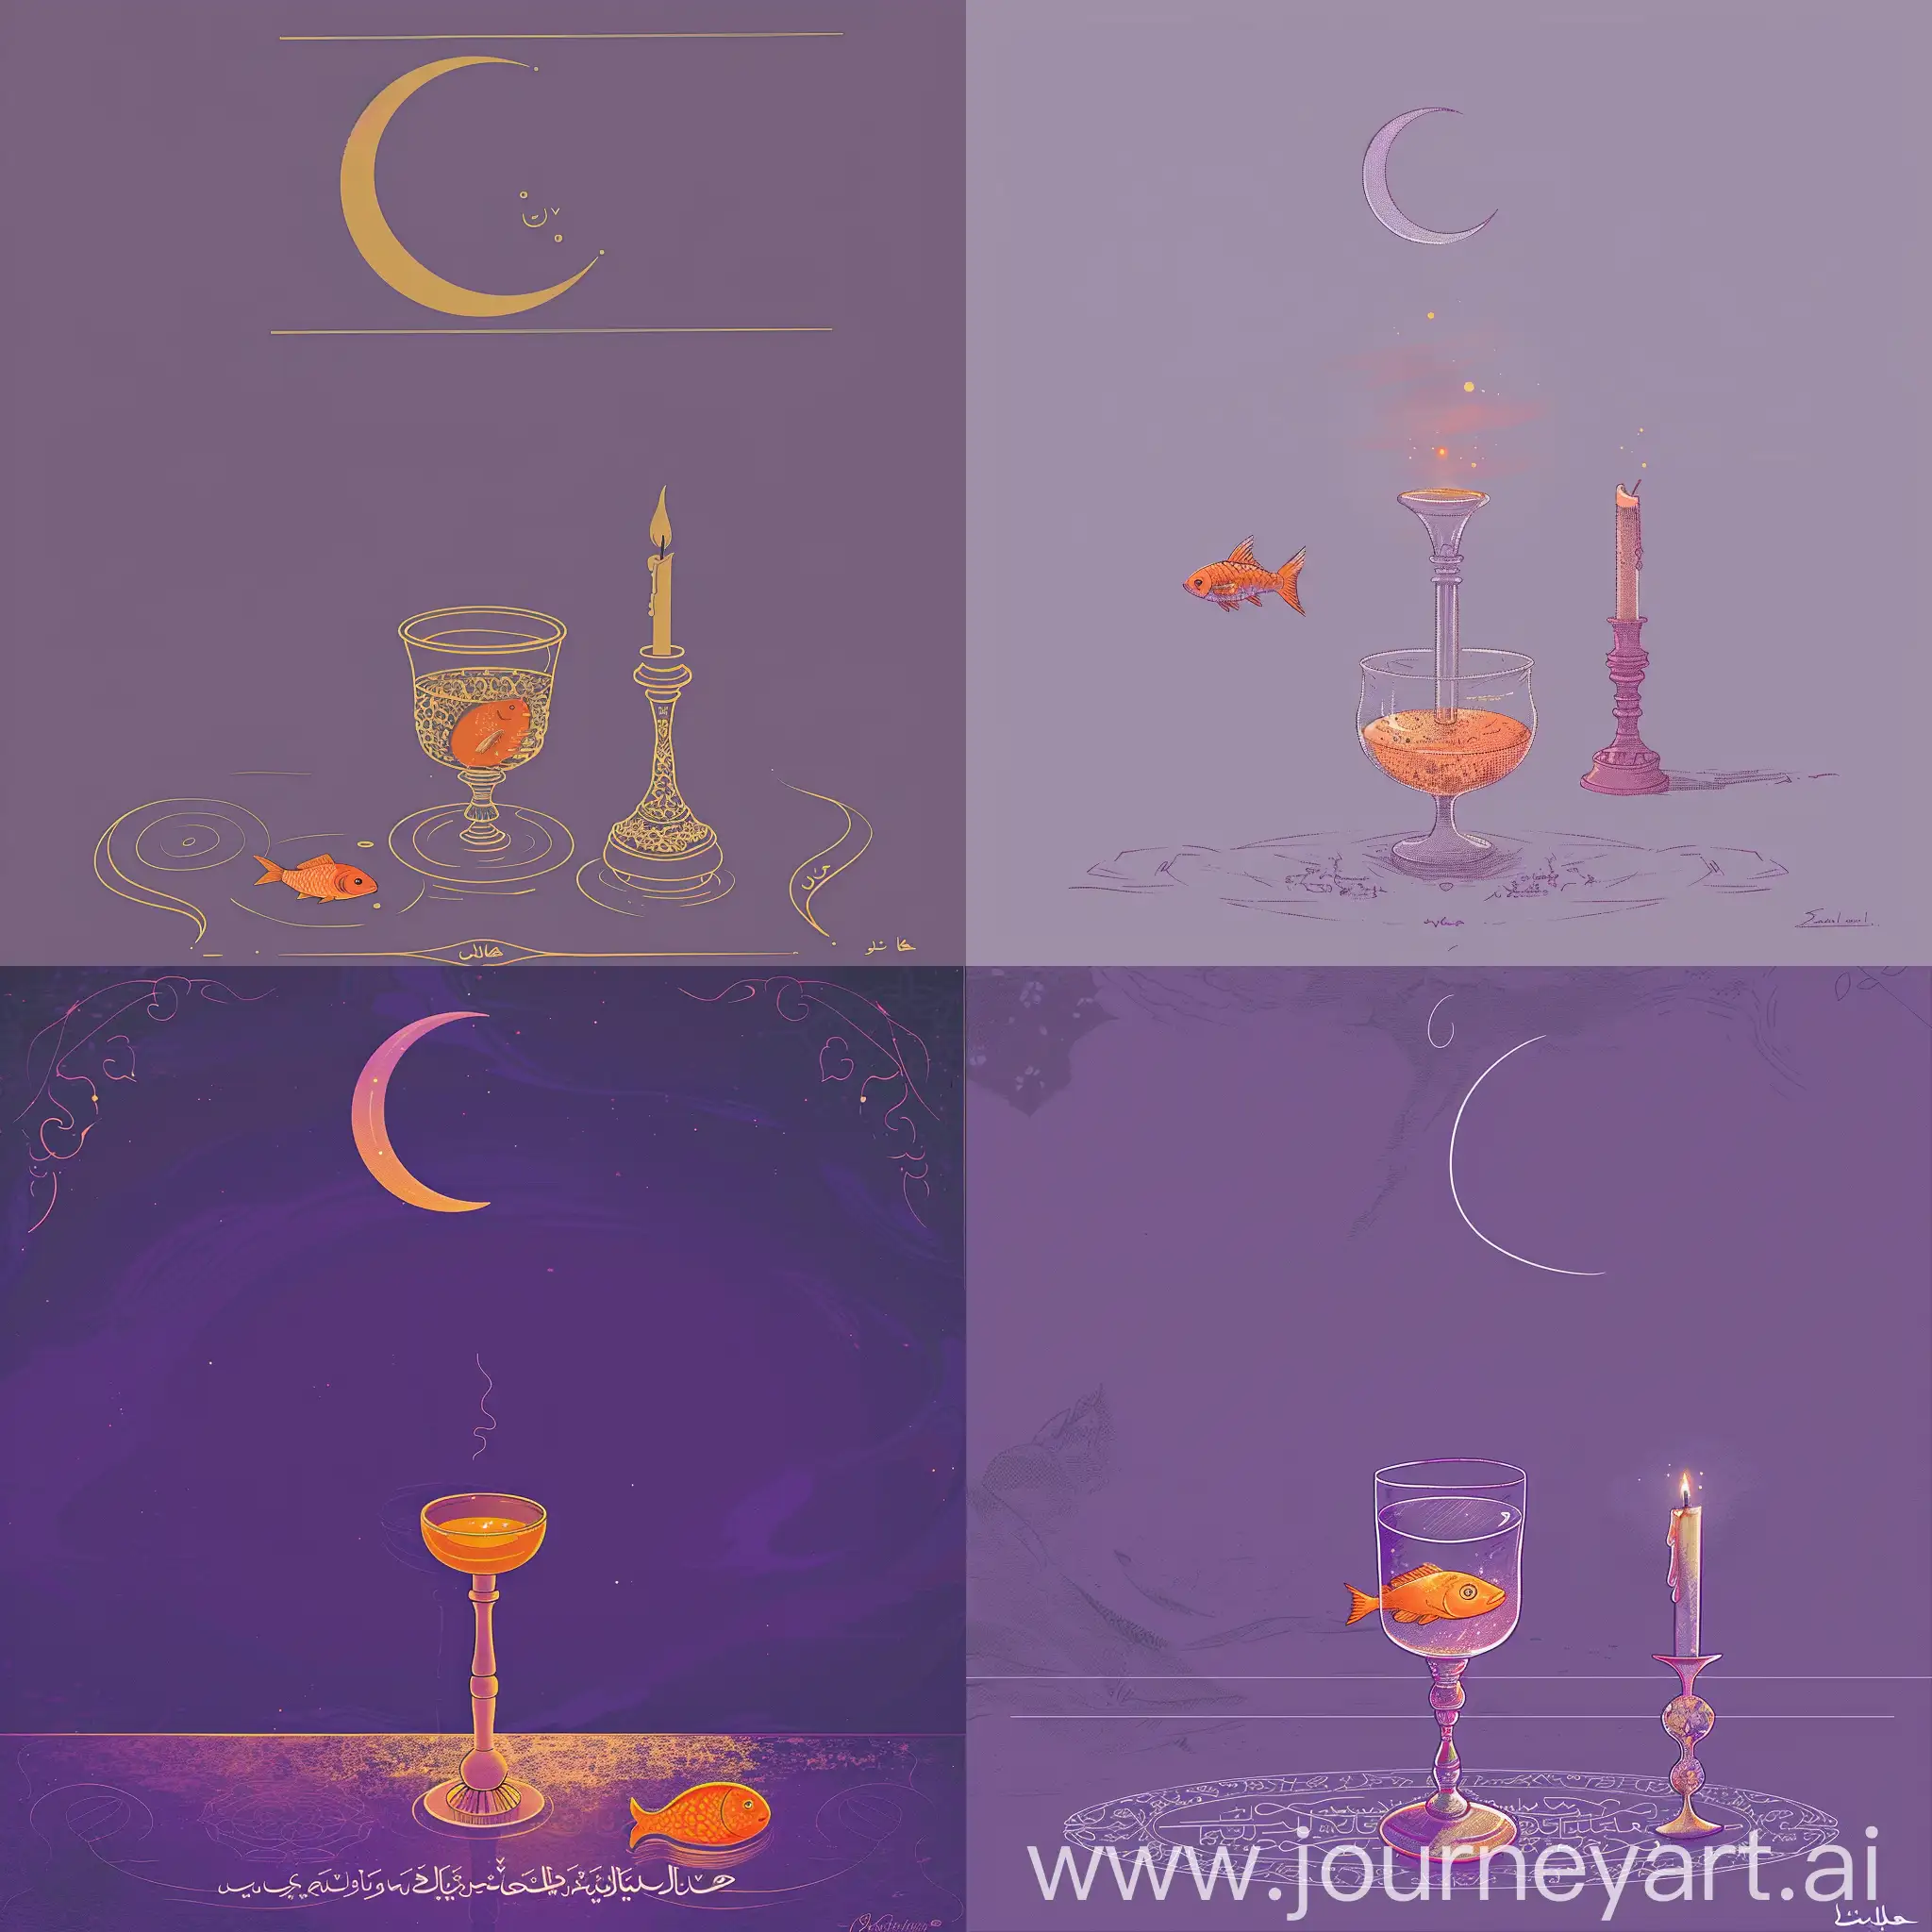 Iranian-Candlestick-with-Orange-Fish-and-Crescent-Moon-on-Purple-Background